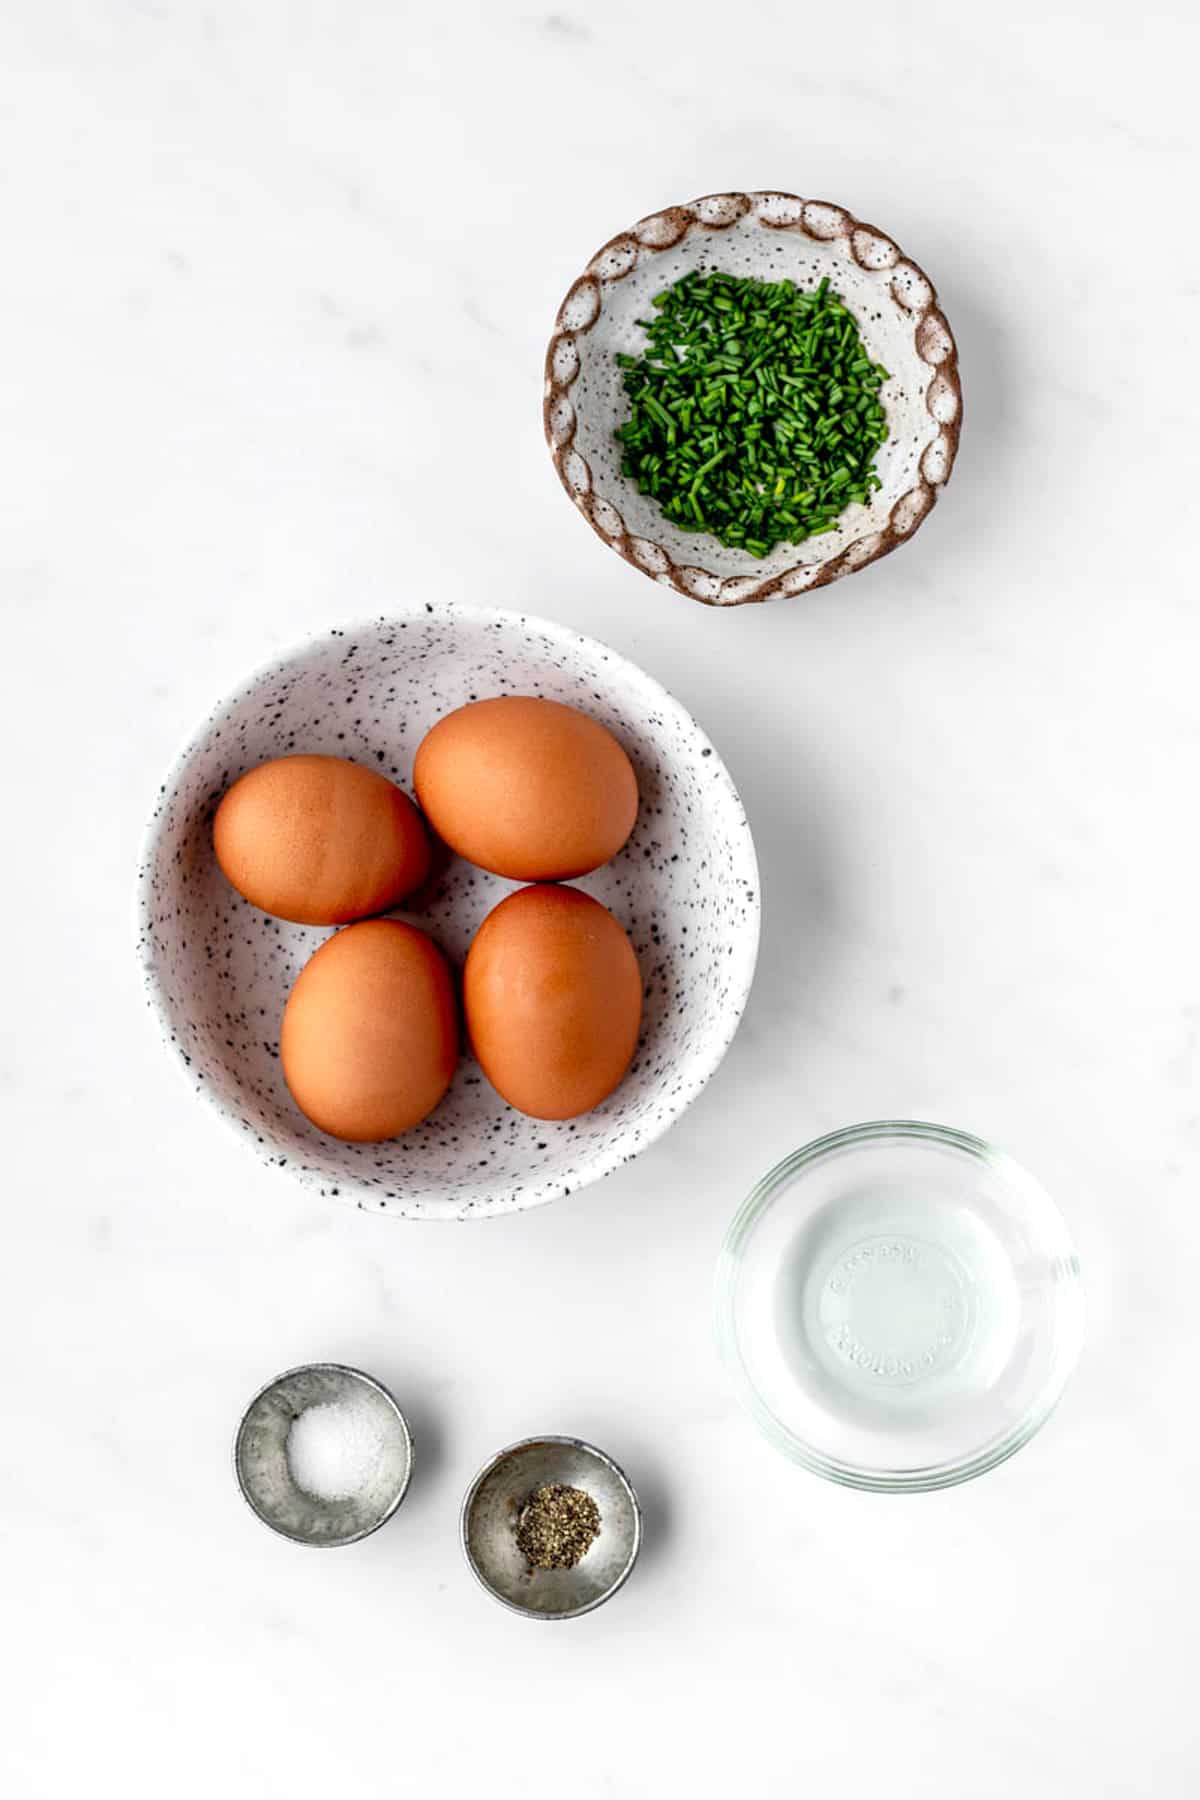 The ingredients for creamy scrambled eggs; including 4 eggs, salt and pepper, and olive oil, plus chives for a garnish.